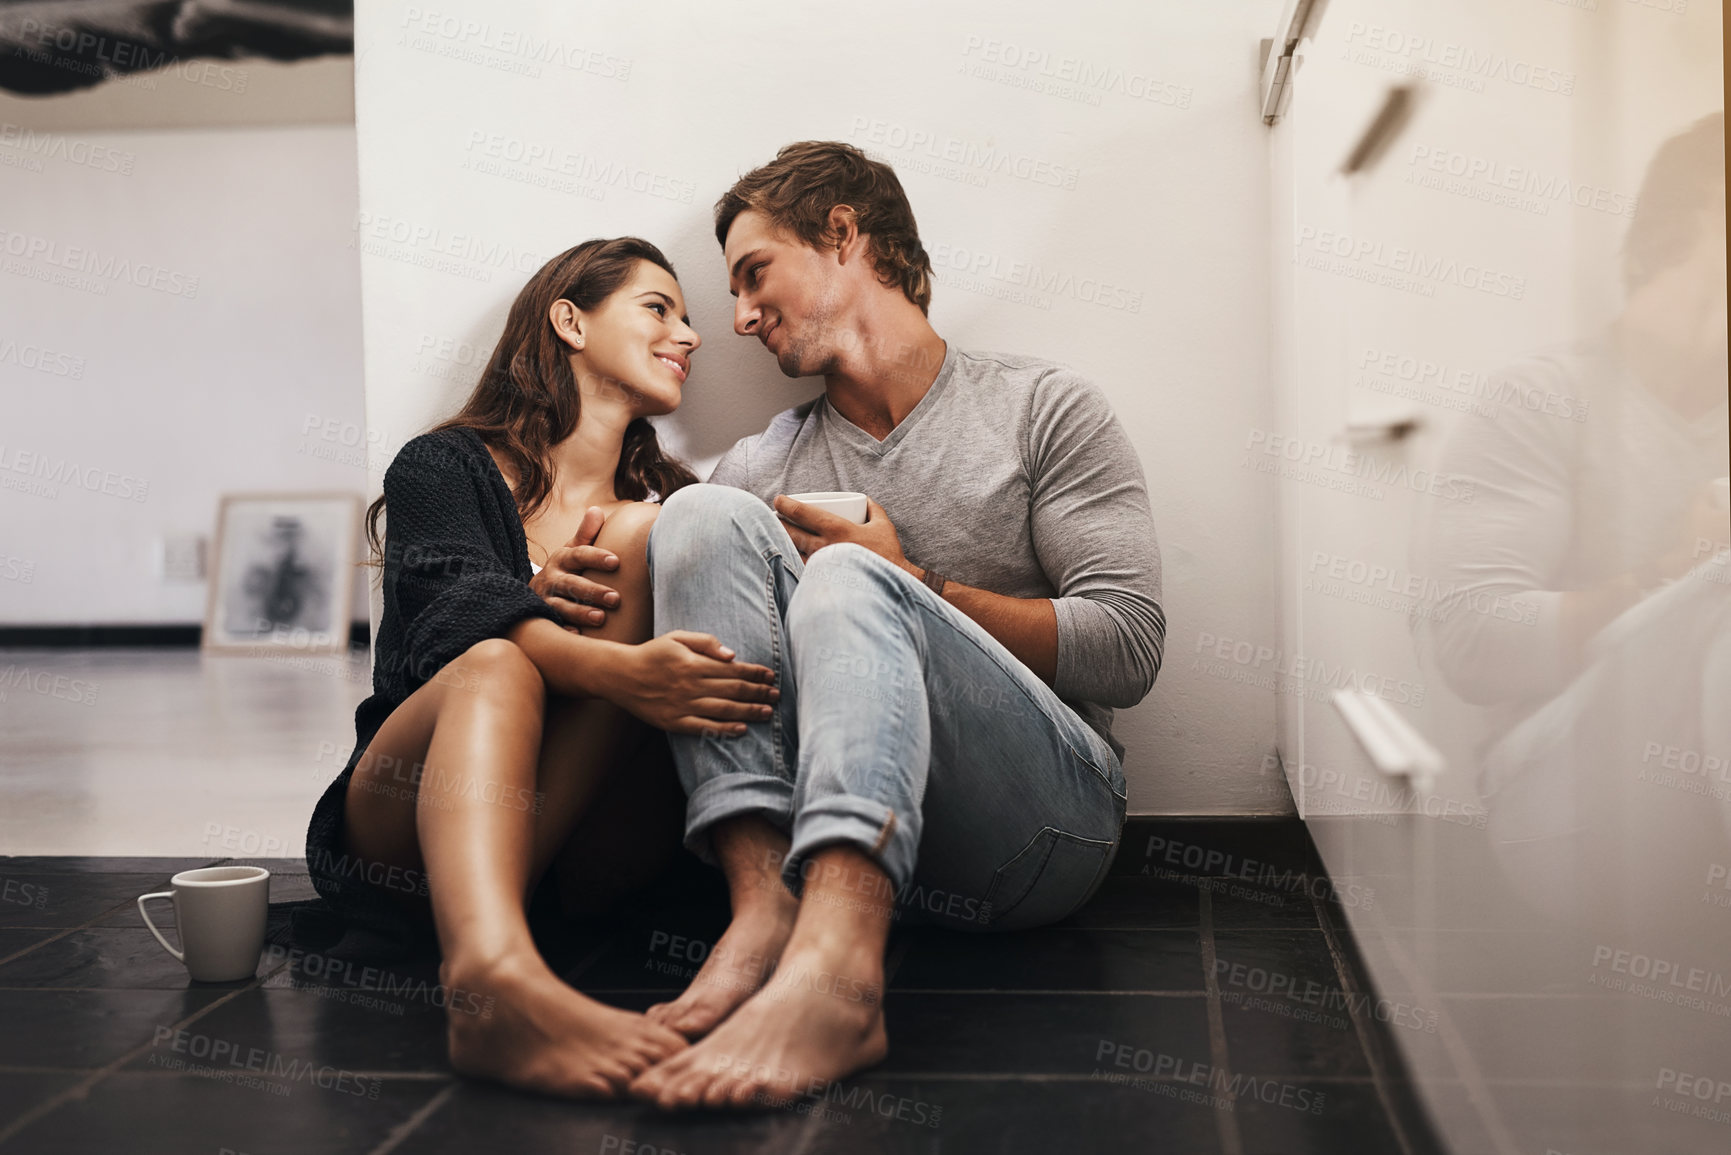 Buy stock photo Shot of an affectionate young couple sitting on the kitchen floor